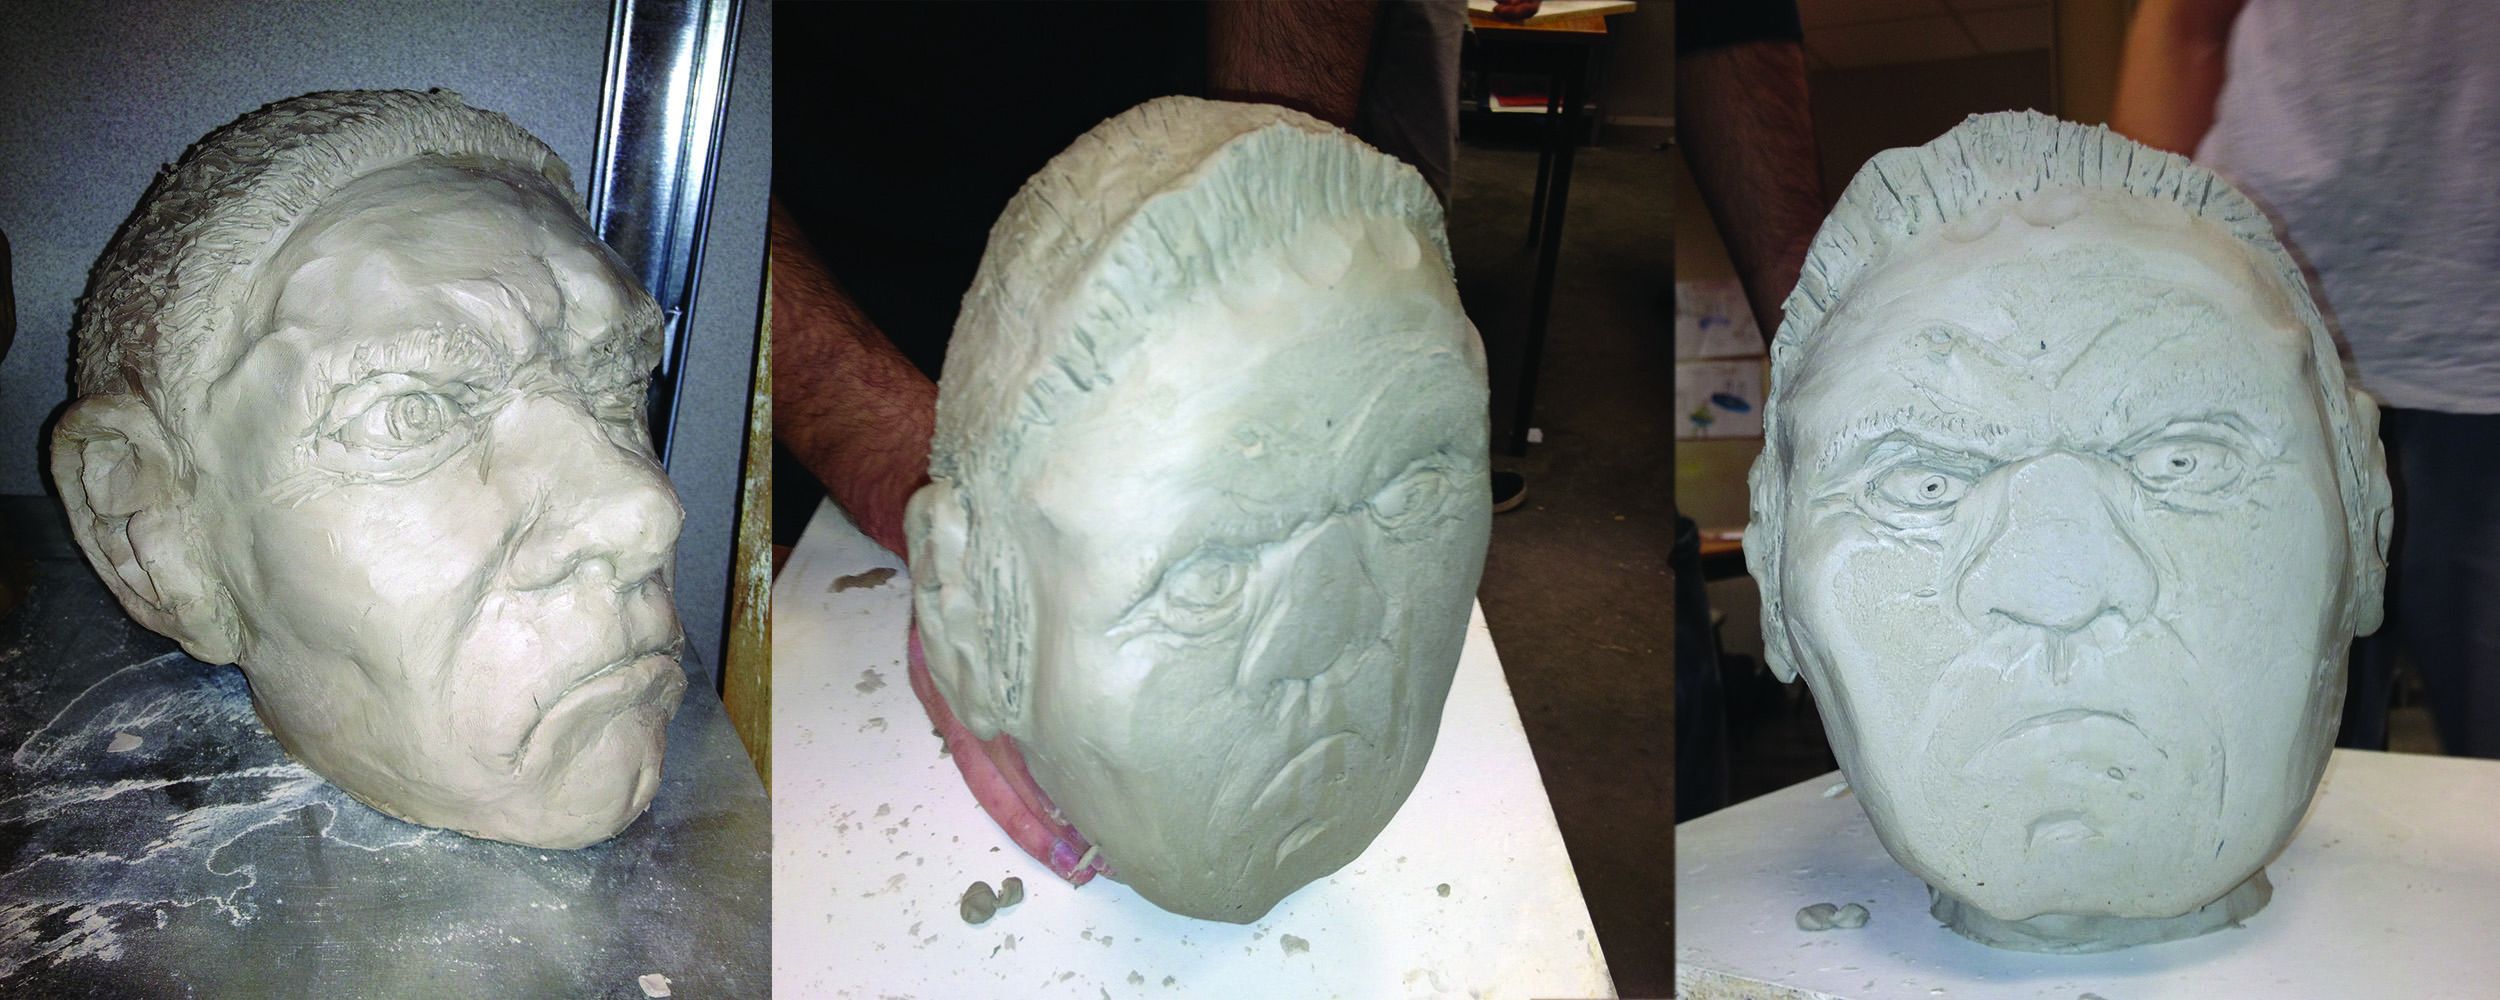 This clay sculpture fell perfectly flat on its face, and looks pissed about it